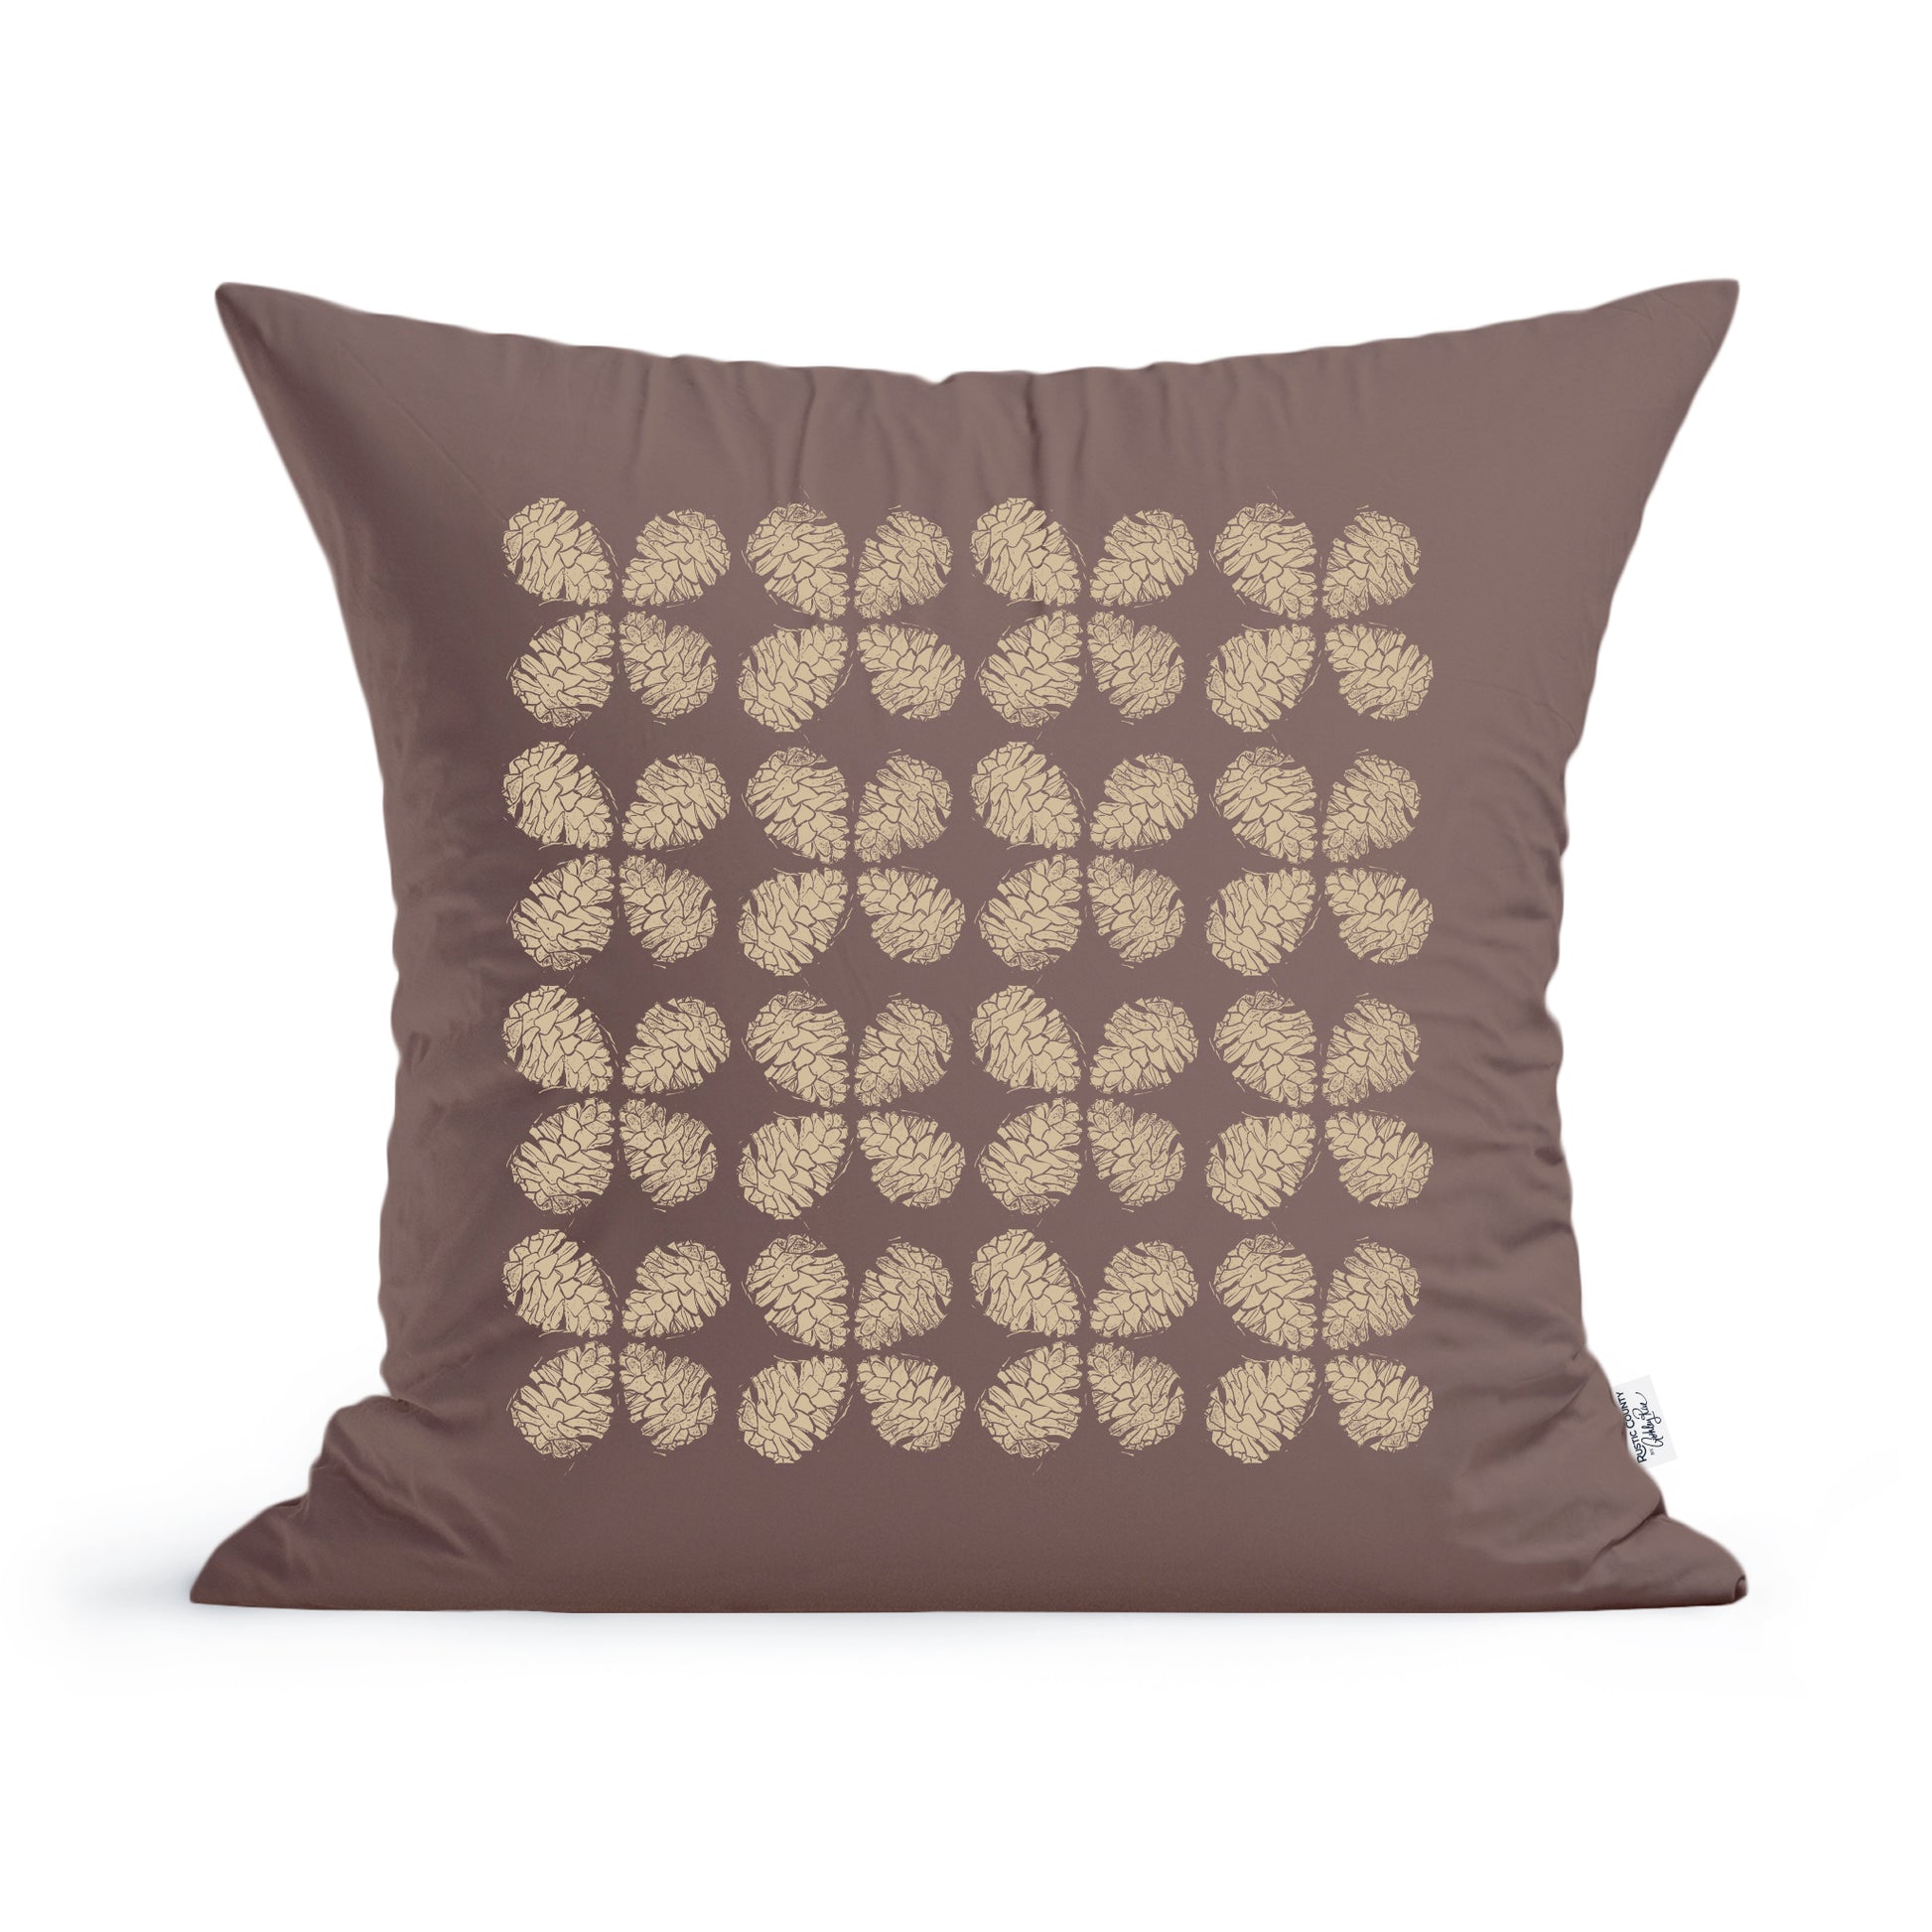 A square brown pillow with a pinecone pattern of small, golden leaves arranged in a grid across its front. The fabric appears smooth, and the leaves' detailed design adds an elegant touch to this Maine Pinecones Pillow by Rustic County.